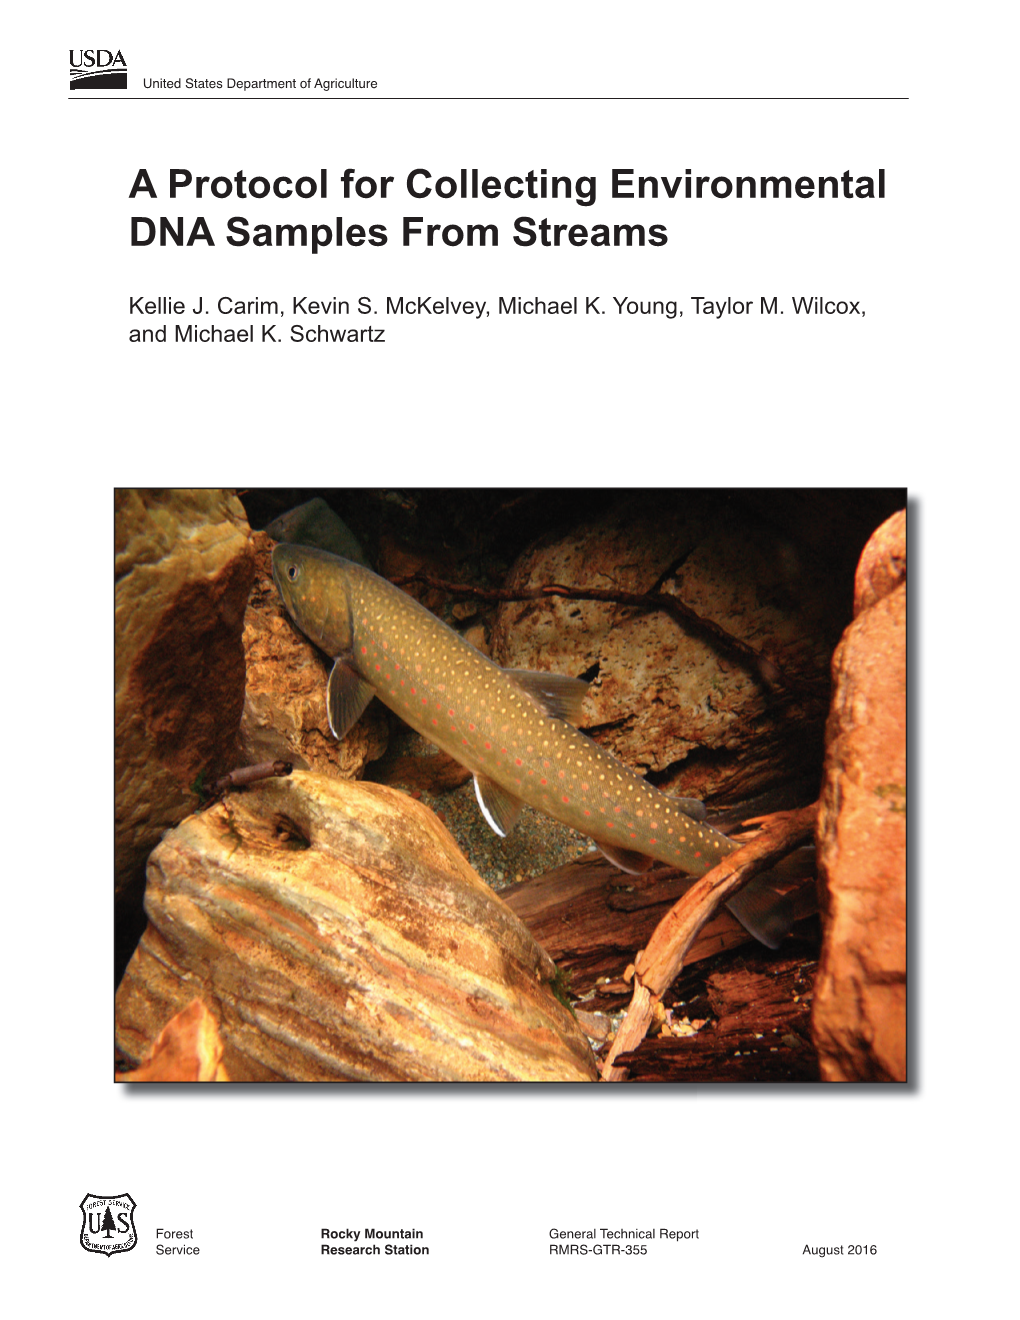 A Protocol for Collecting Environmental DNA Samples from Streams